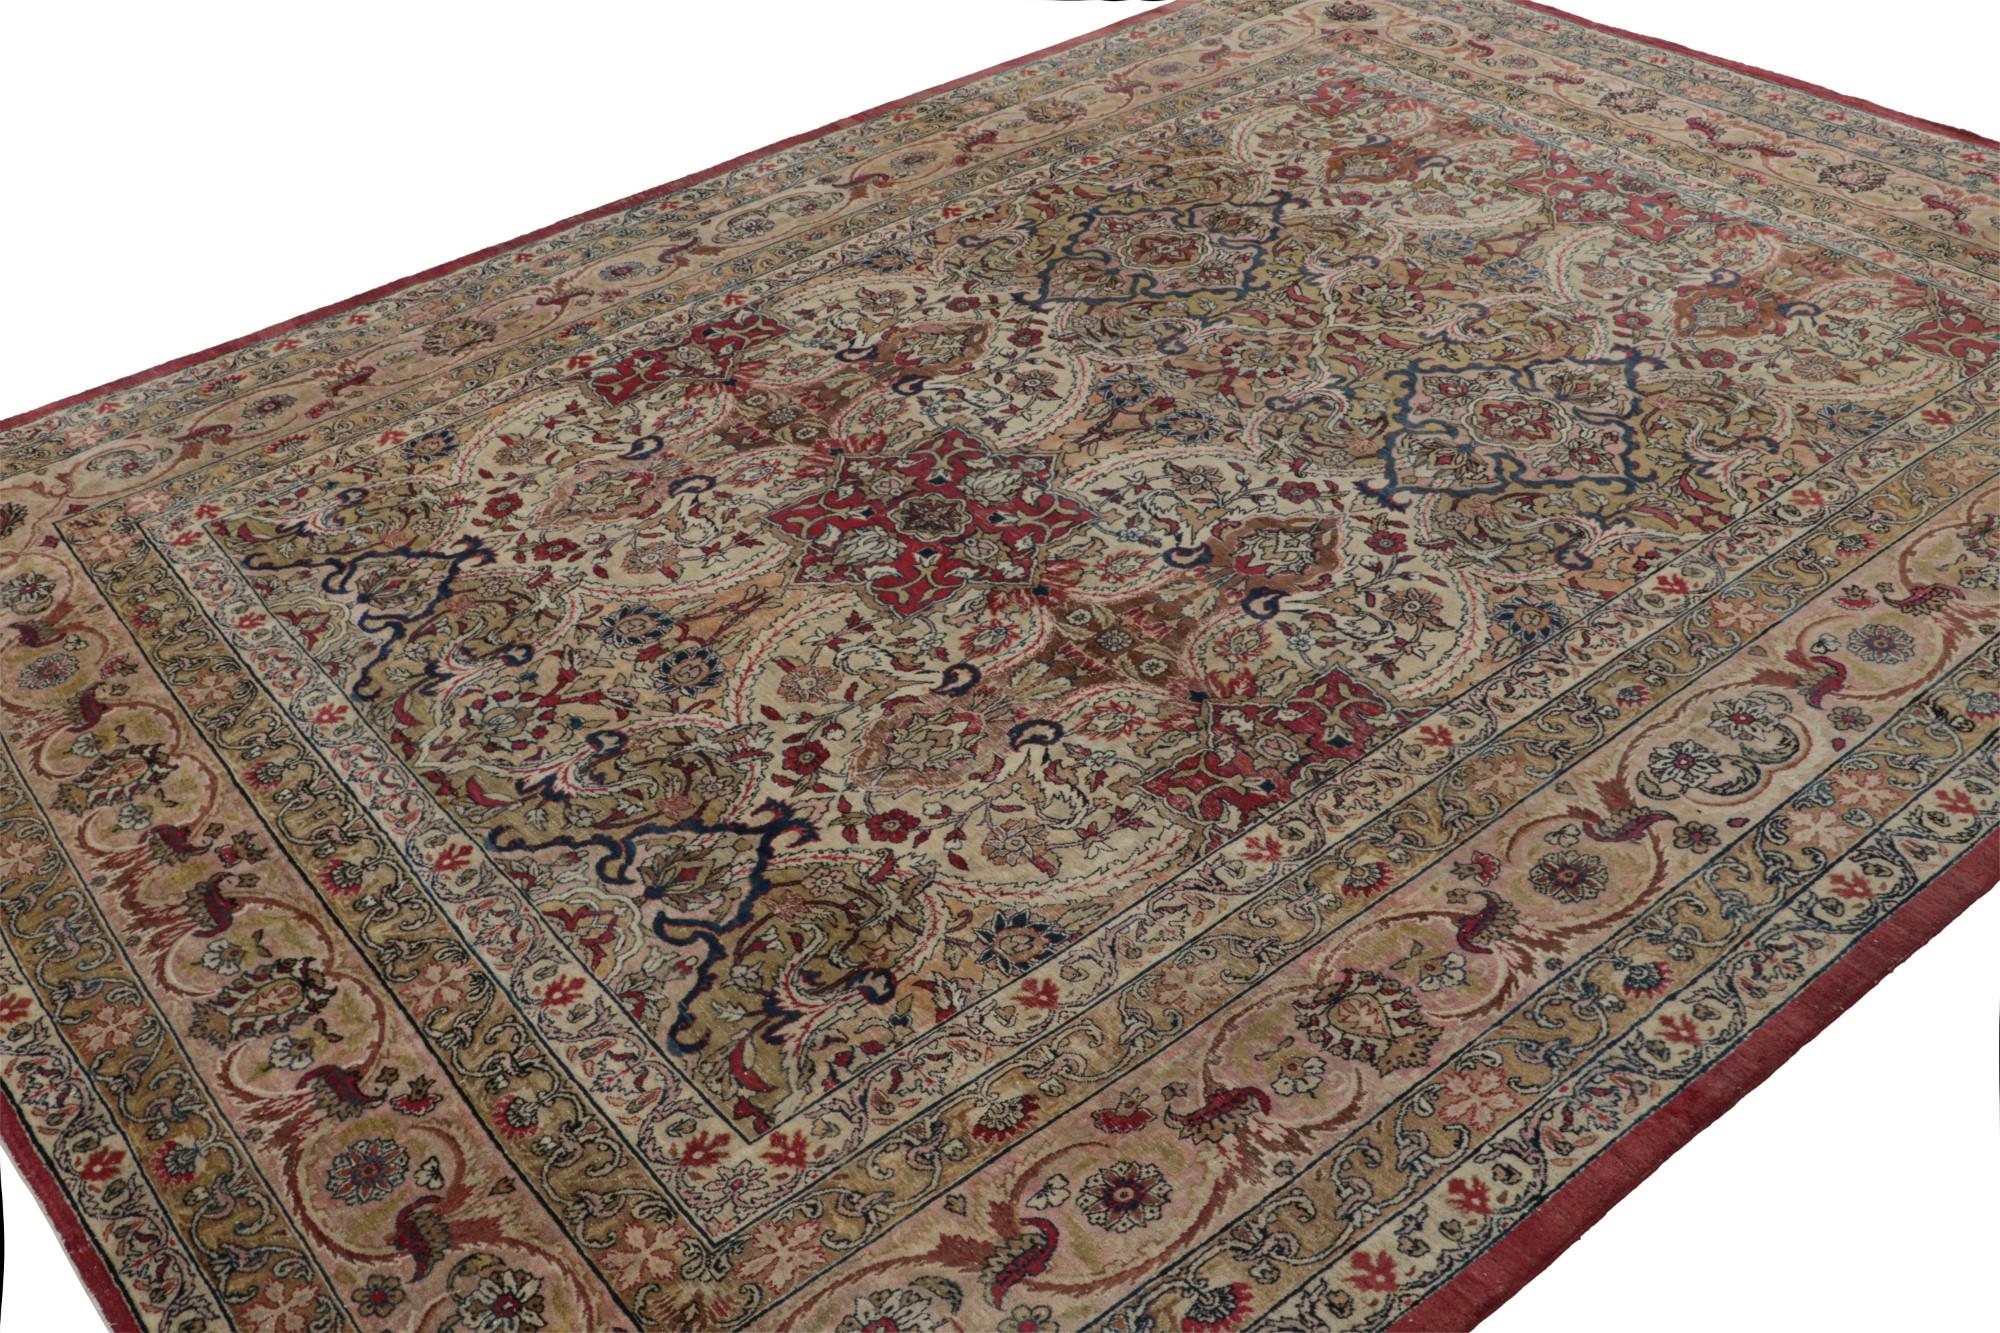 Handwoven in wool, this 9x12 vintage Persian Kerman Lavar rug, circa 1960-1970, originates from the titular region in Iran known for its masterpieces

On the Design: 

Admirers of the craft will appreciate this masterpiece as a rare collectible, as